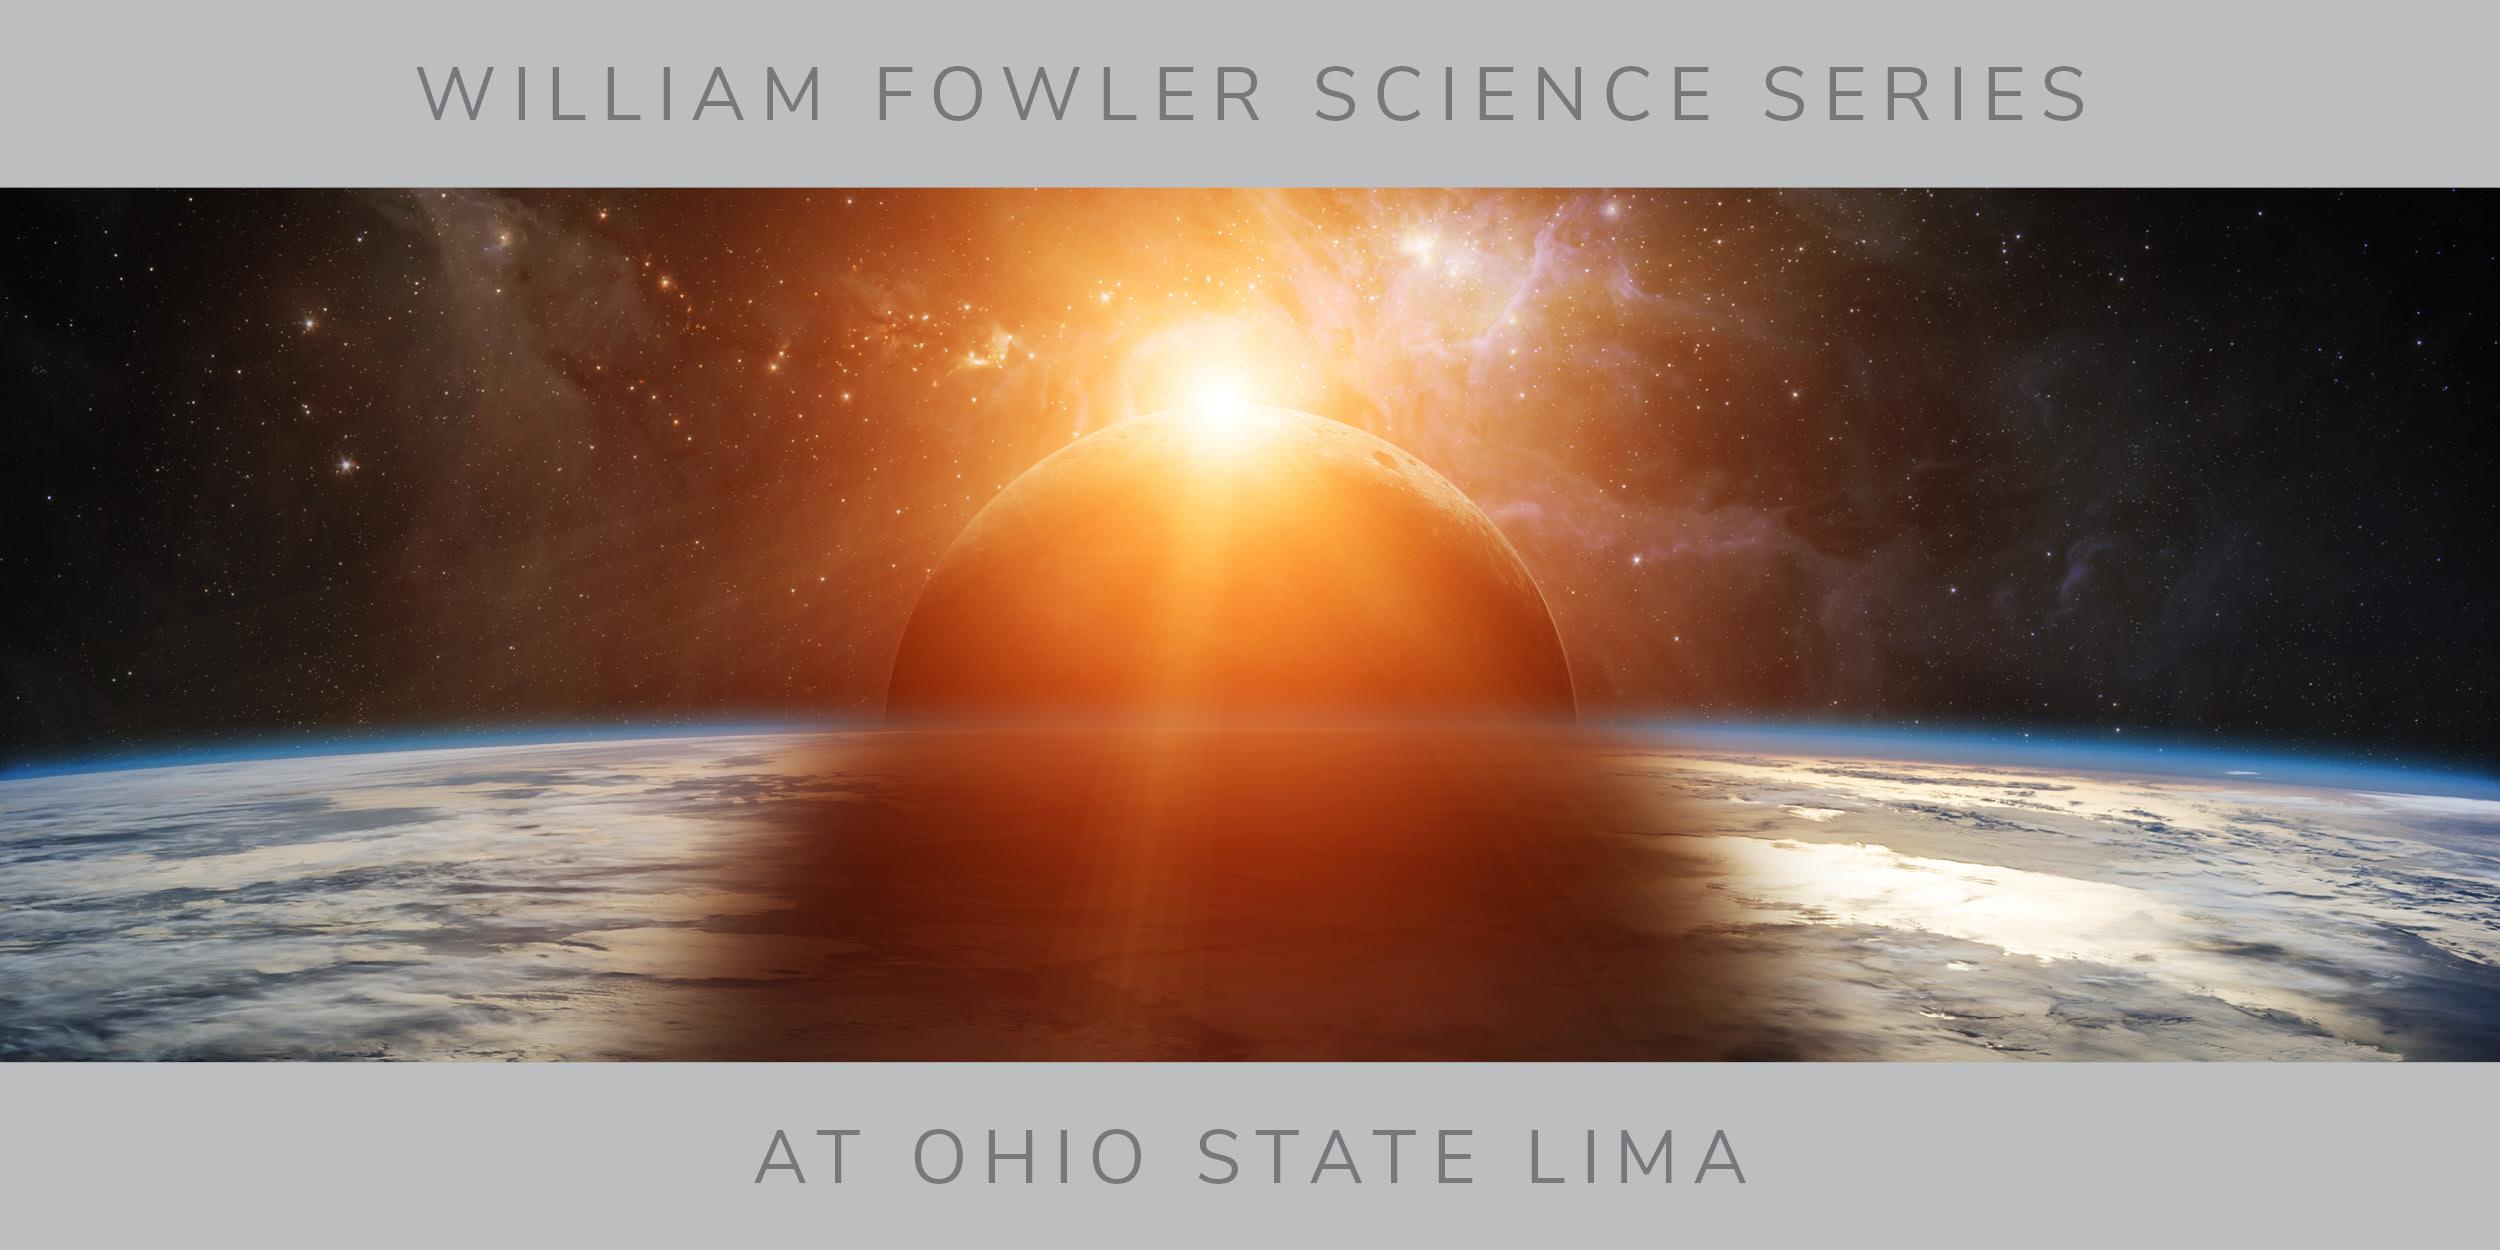 Fowler Science Series with eclipse